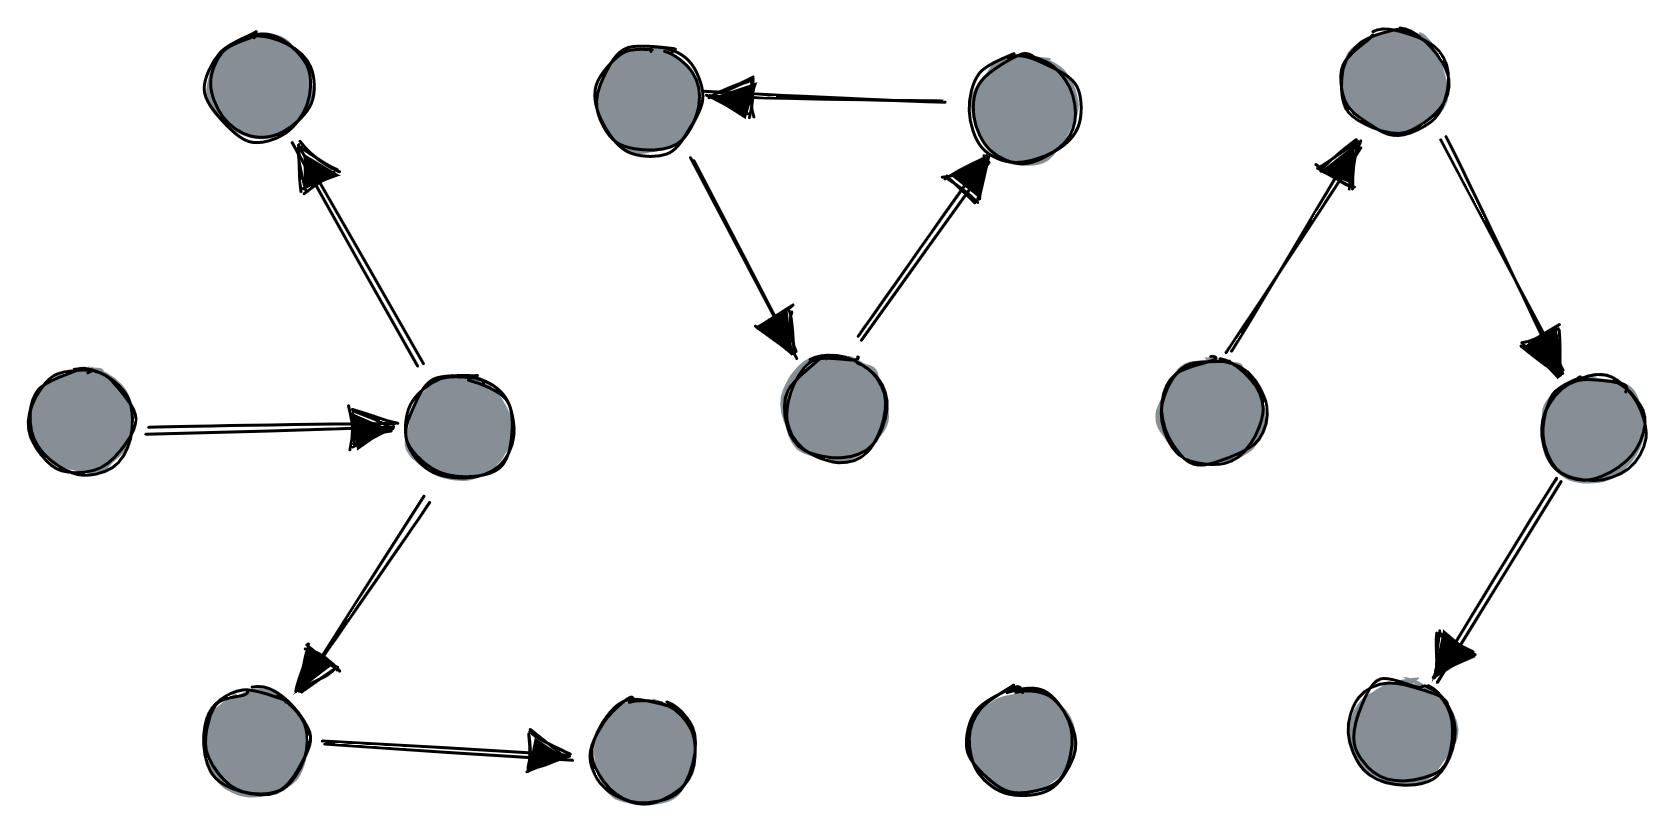 Messy graph with cycles, partitions, and isolated nodes.